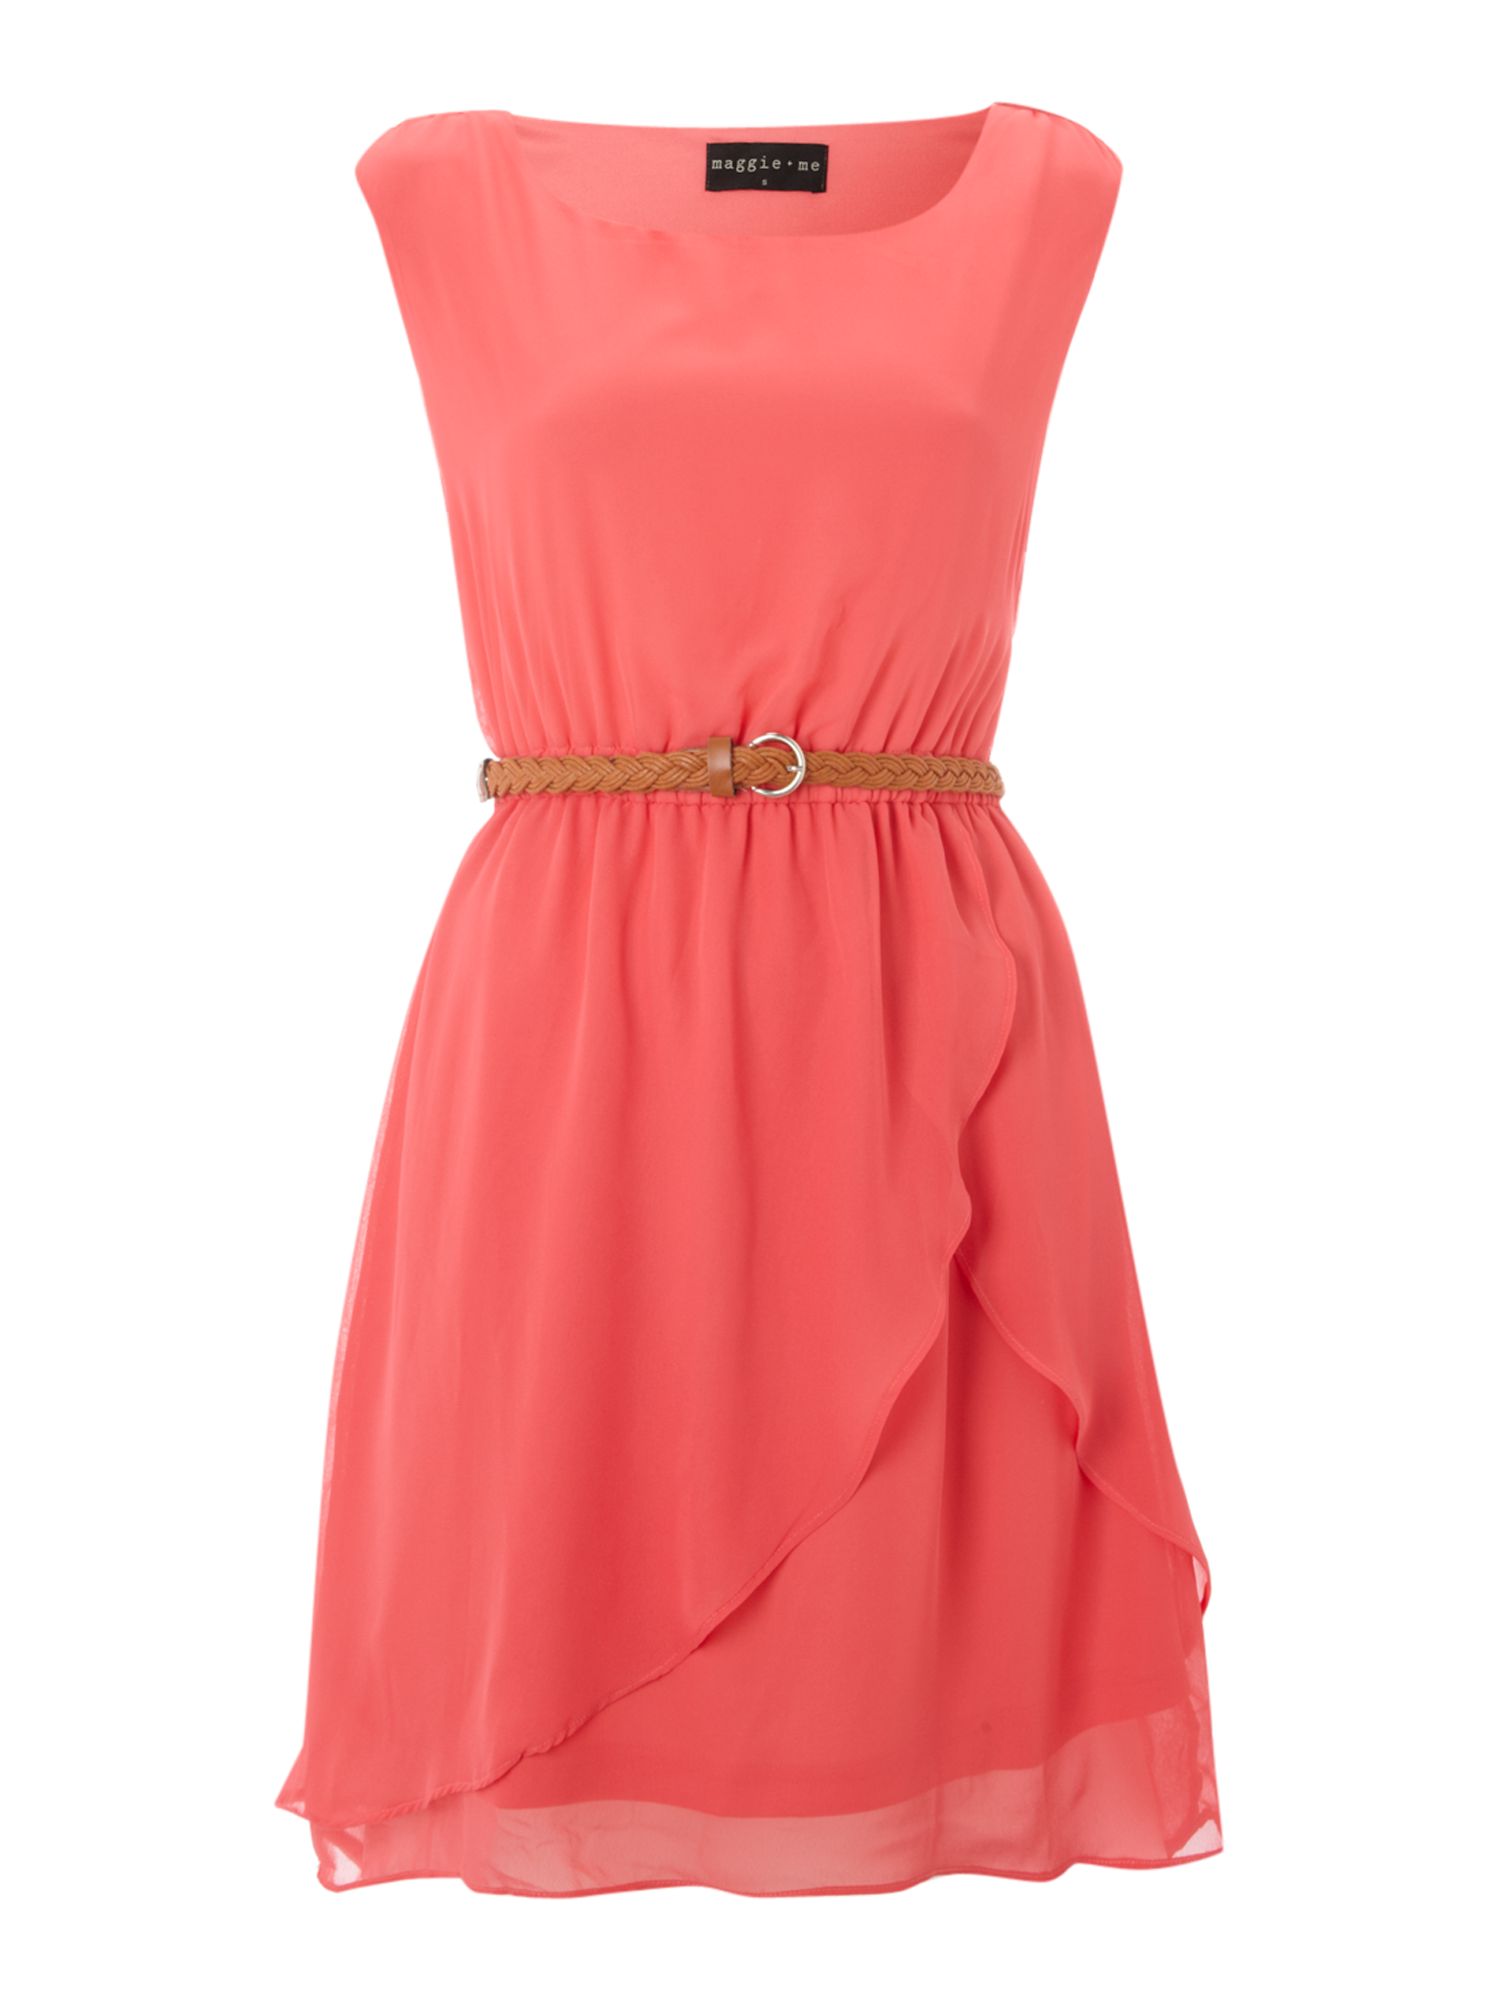 Maggie And Me Sleeveless Sunkissed Belted Dress in Pink (coral) | Lyst